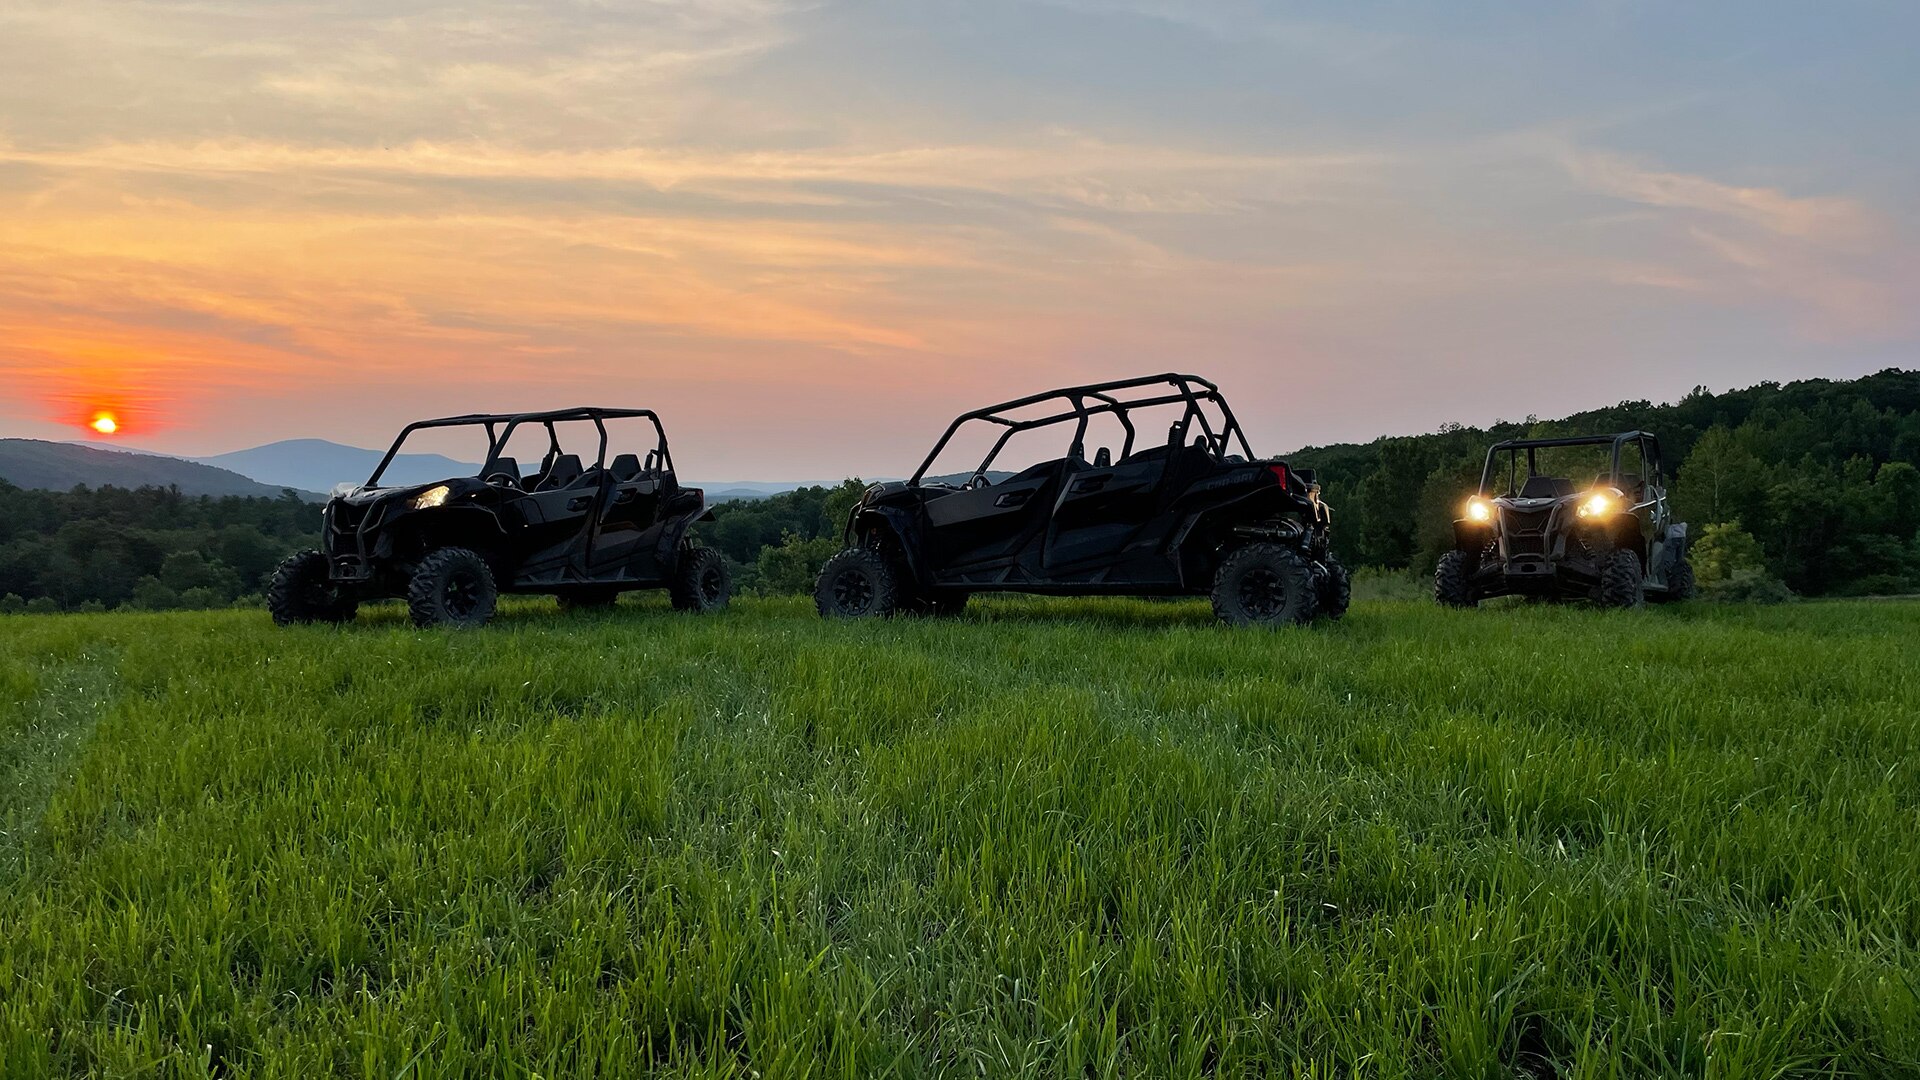 A trio of Can-Am rides in the grass